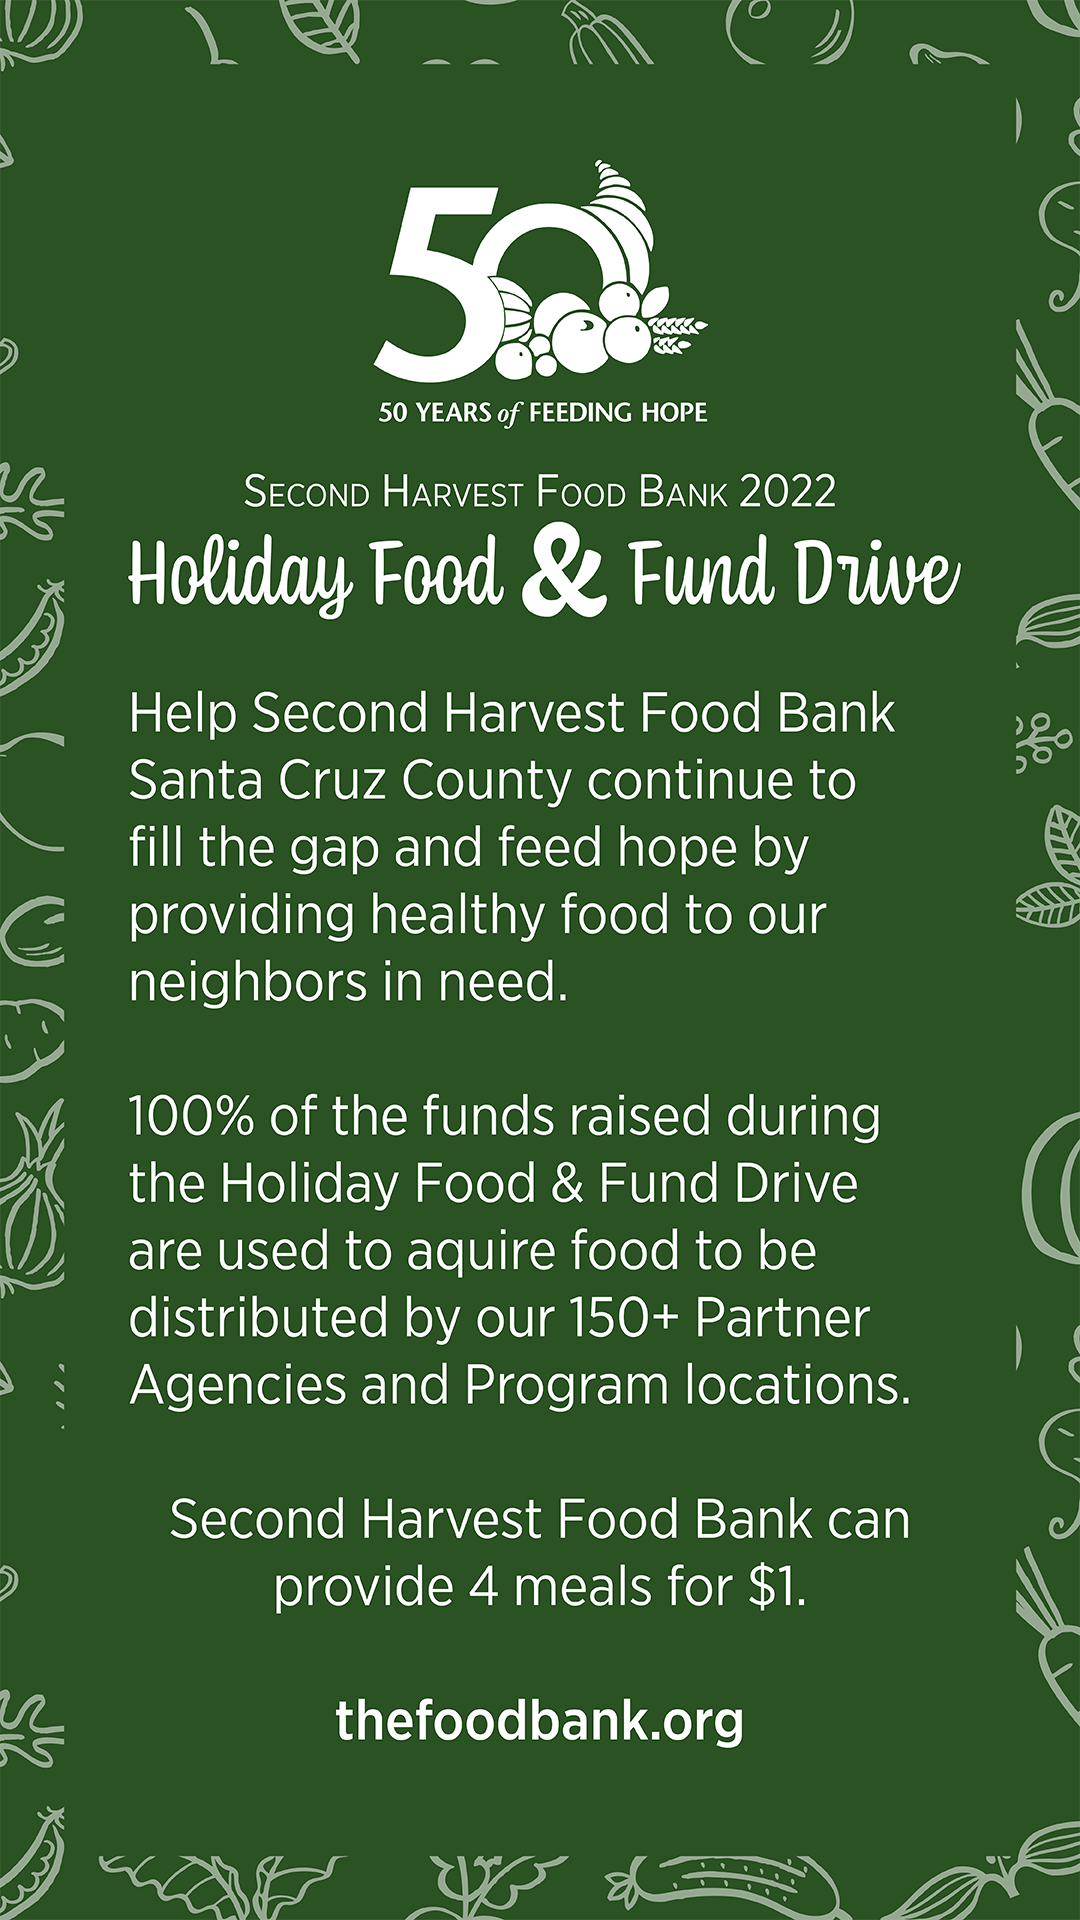 Holiday Food 7 Fund Drive story